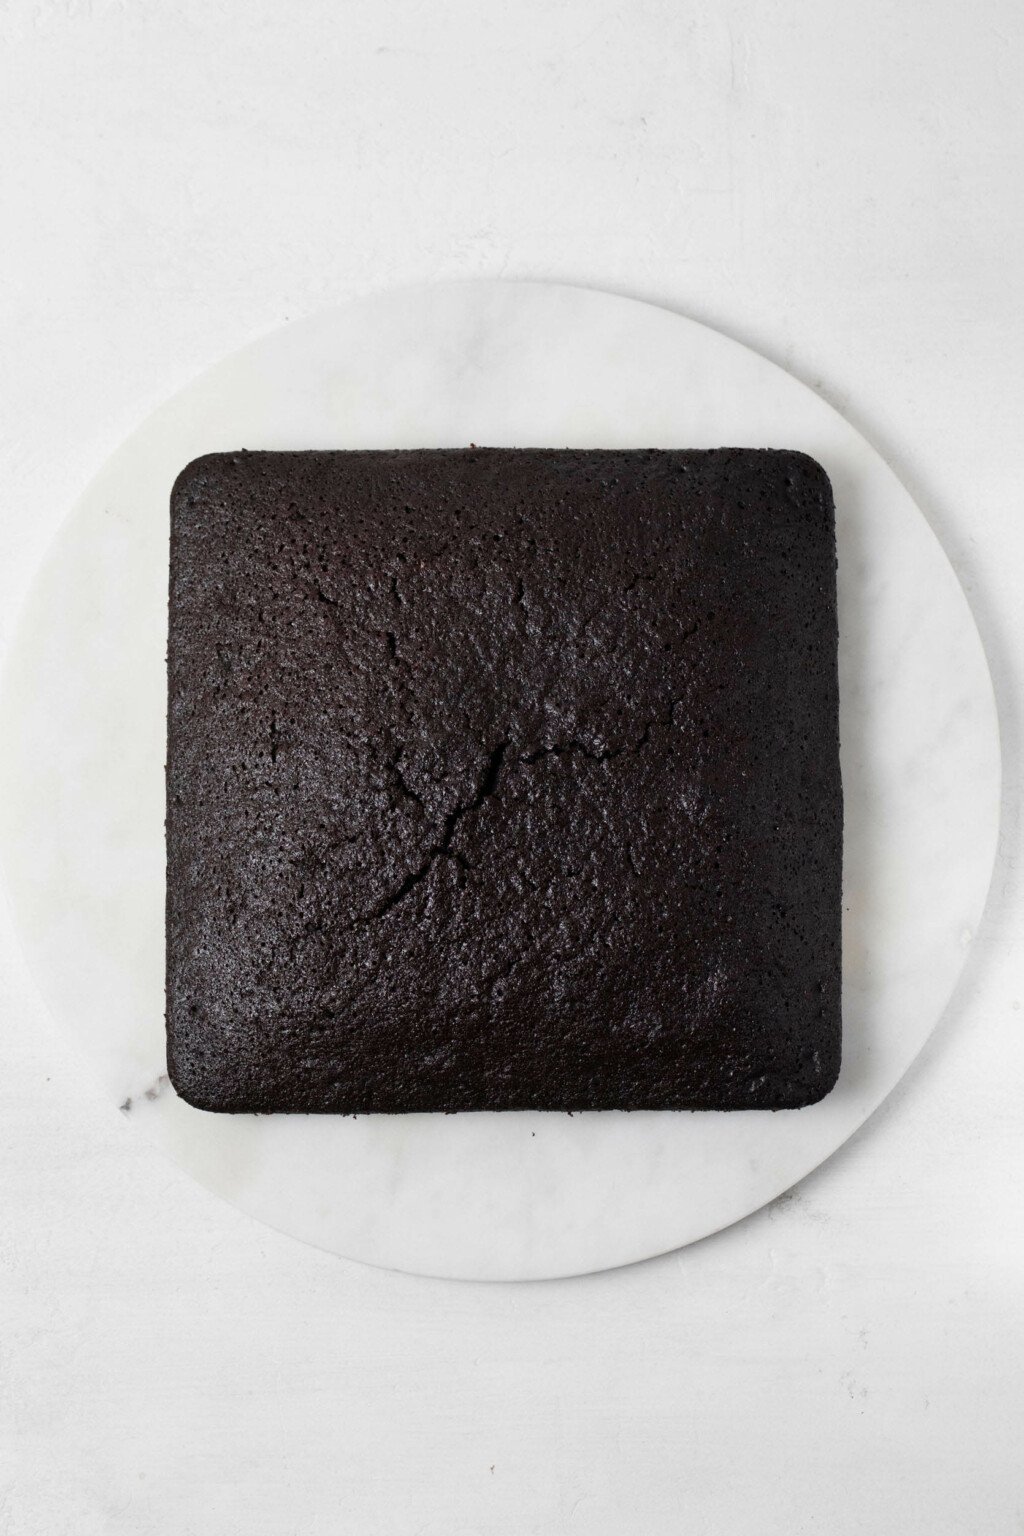 A square, chocolate cake is resting on a round, white marble platter.